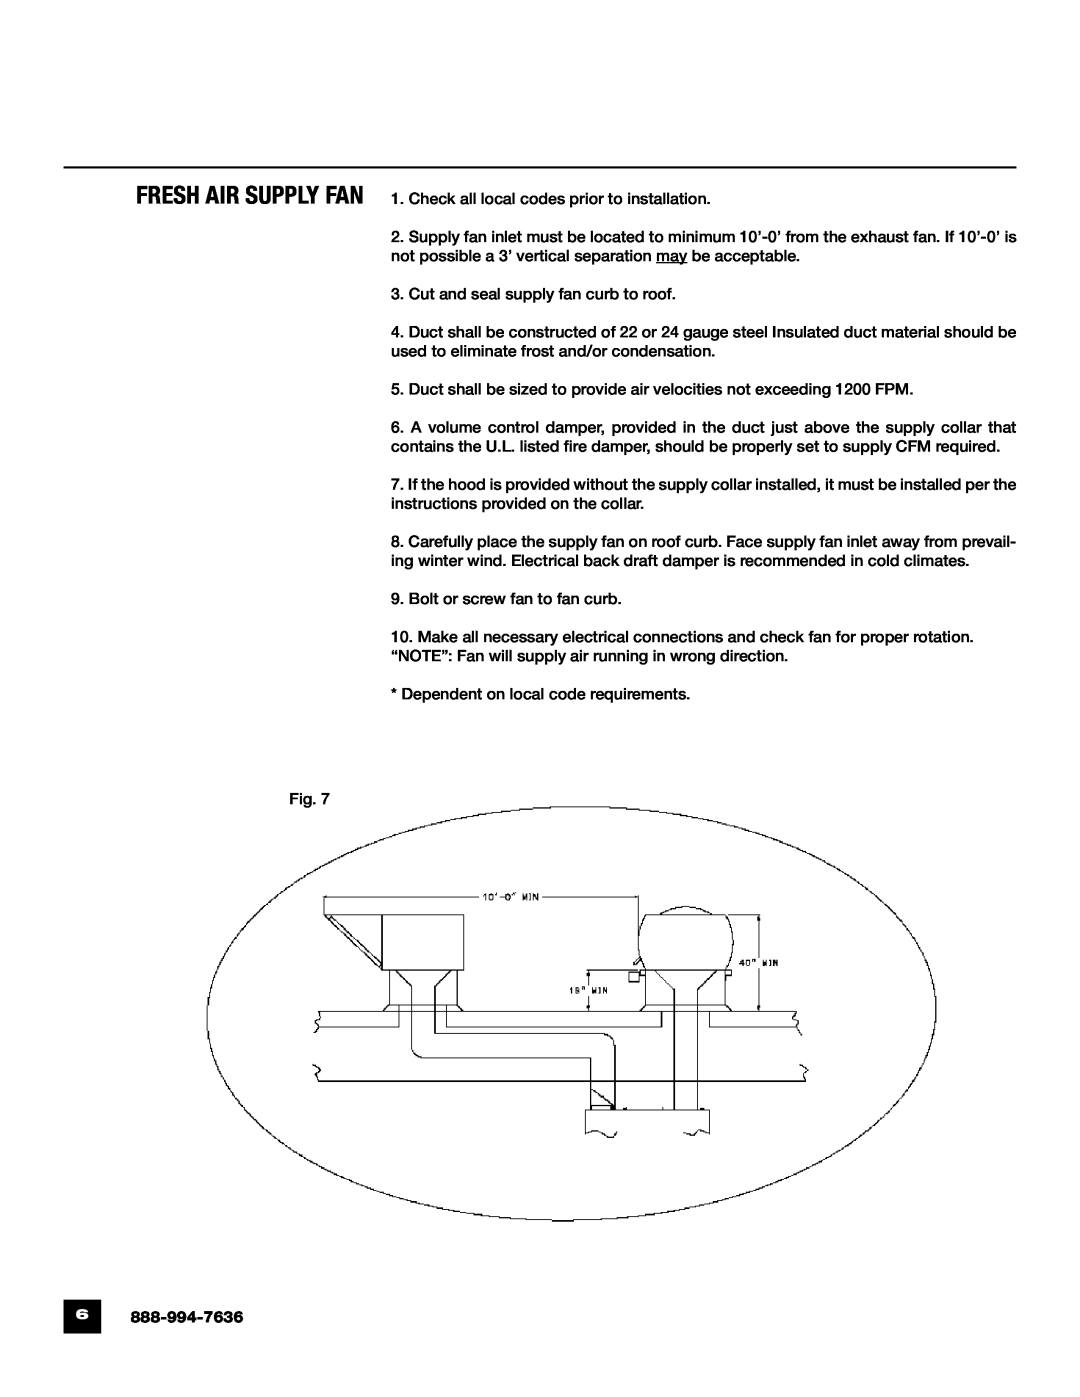 Unified Brands Kitchen Ventilation Systems operating instructions Cut and seal supply fan curb to roof 